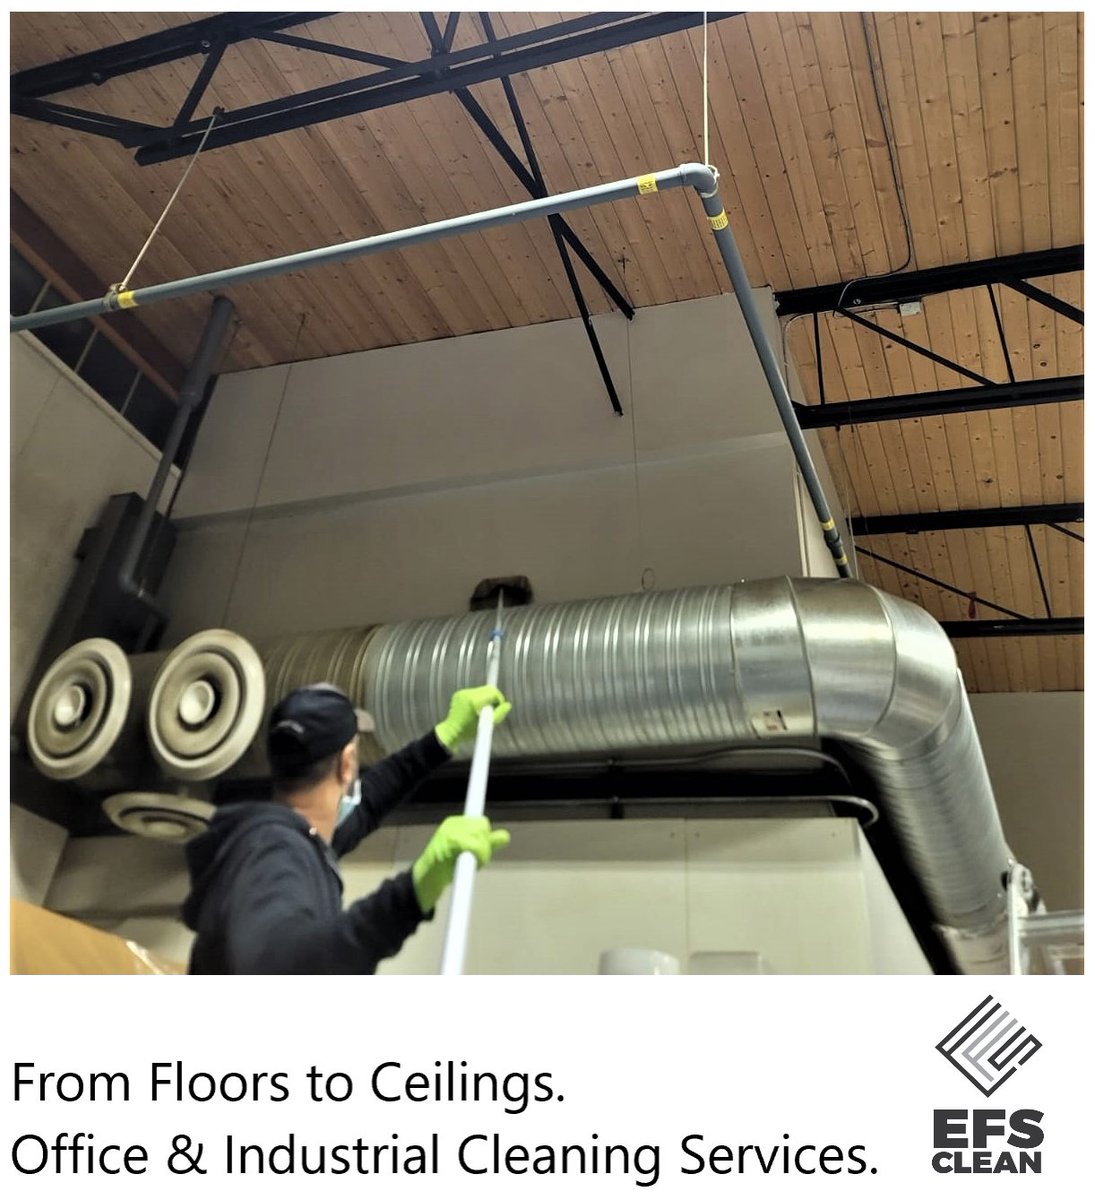 Industrial cleaning? No problem! From floors to ceilings, we clean it all.

#Calgary #cleaningservices #janitorialservices